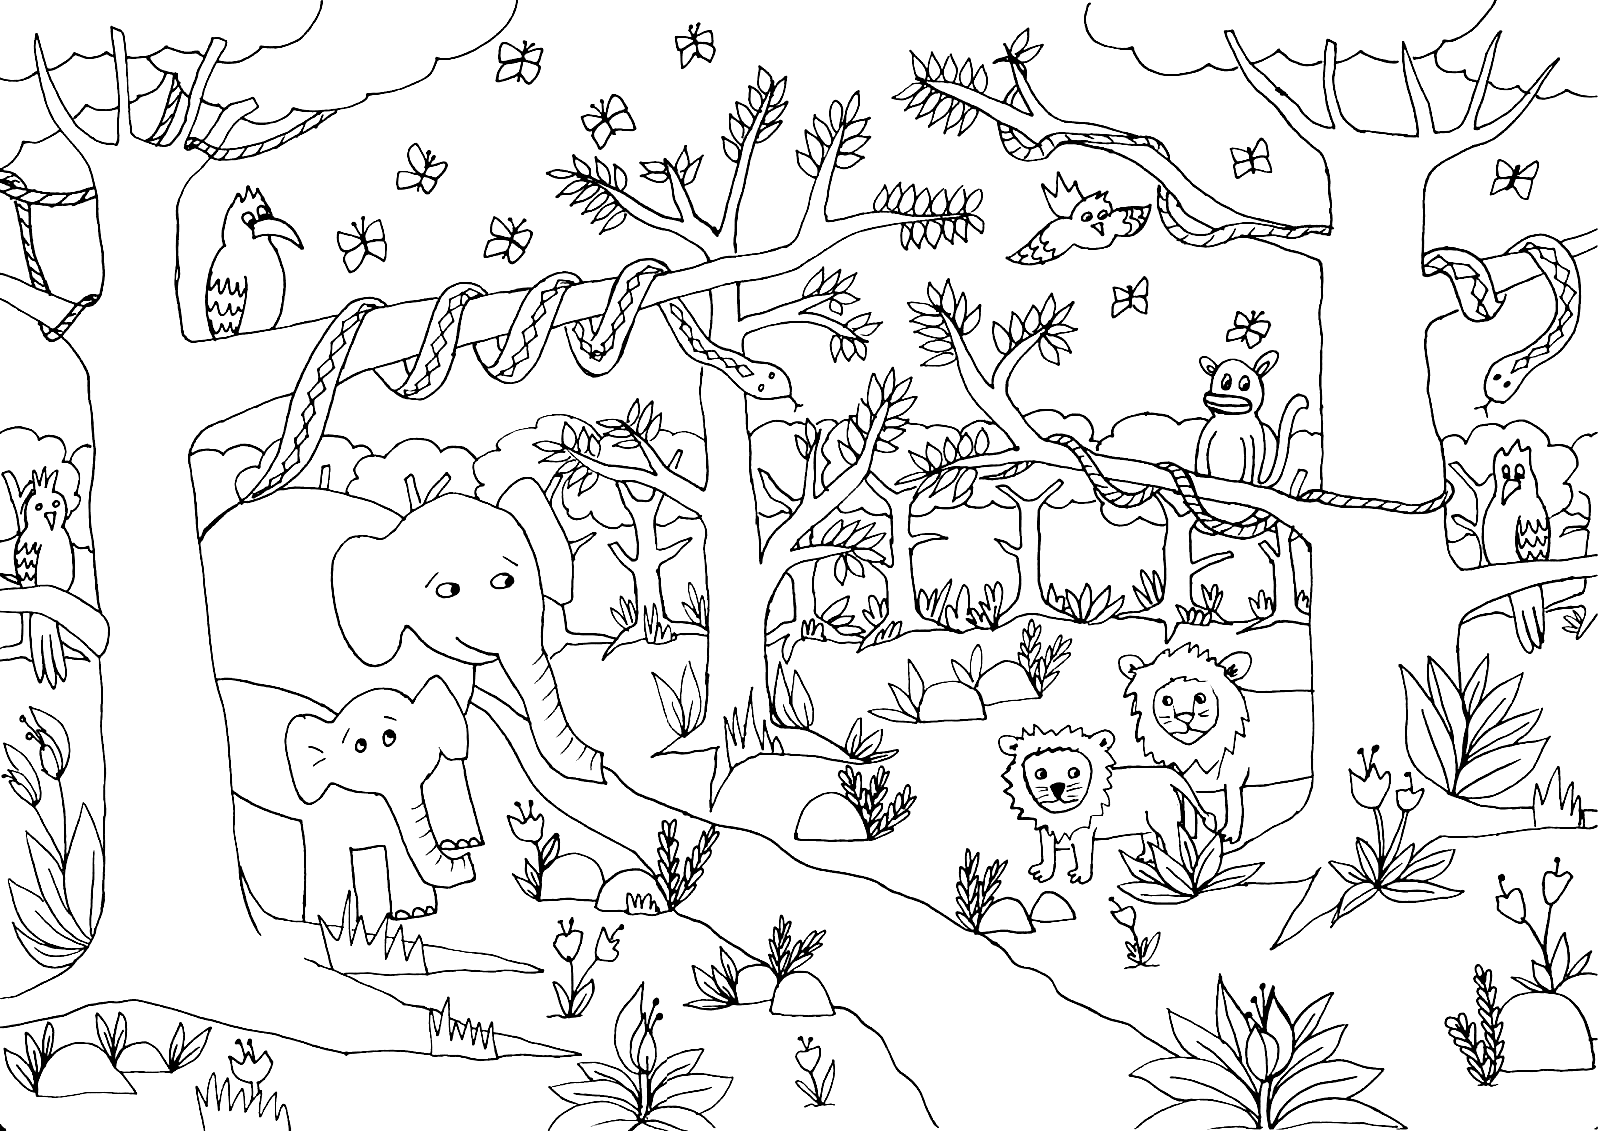 Tropical Animals and Birds Coloring Pages   Jungle Coloring Pages ...